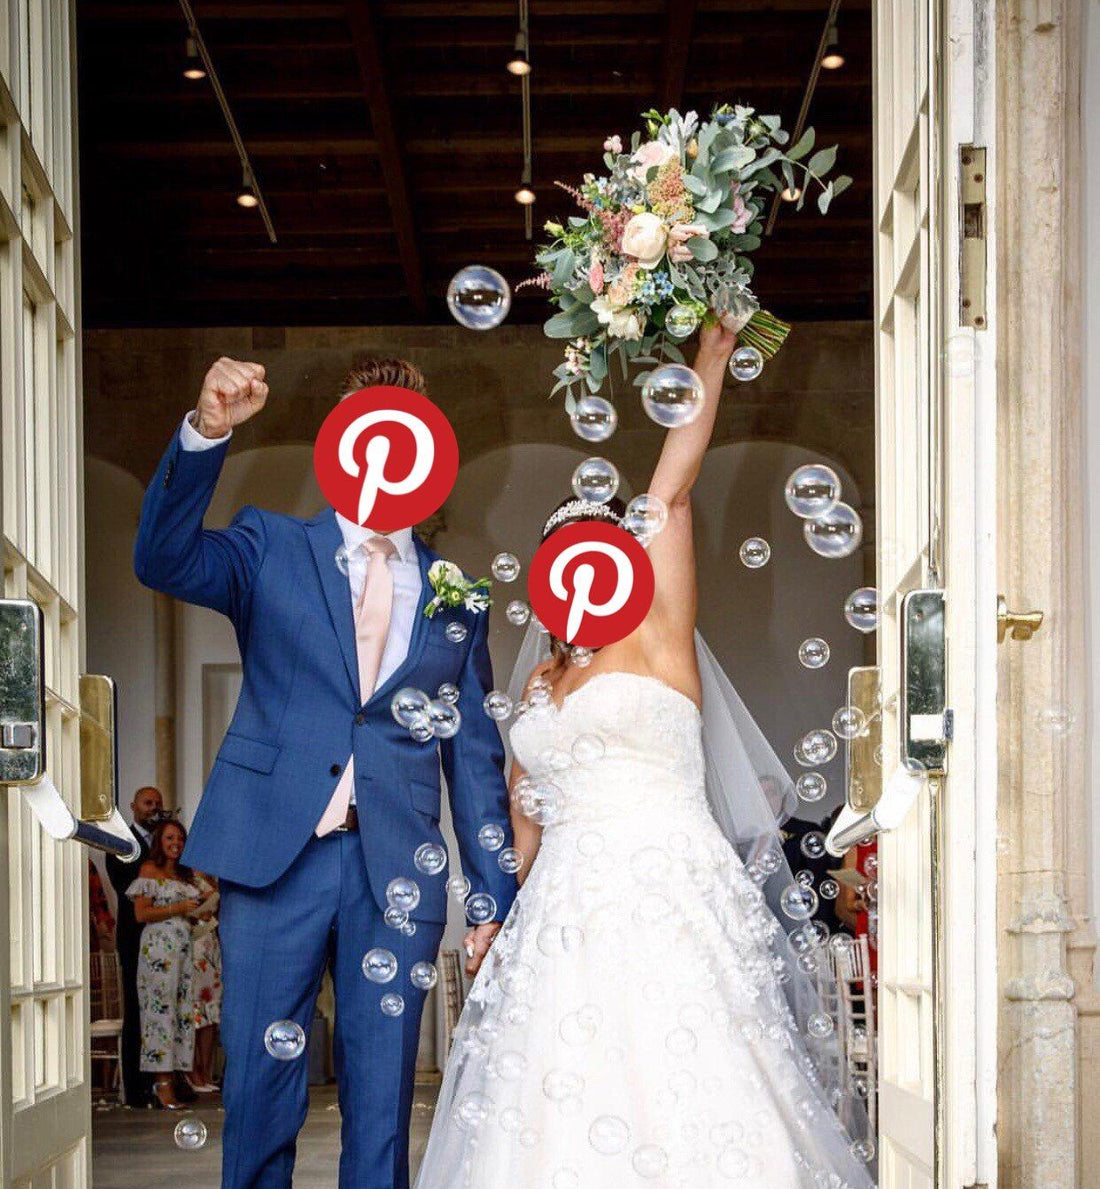 The Pinterest Age of Weddings - Swagger & Swoon